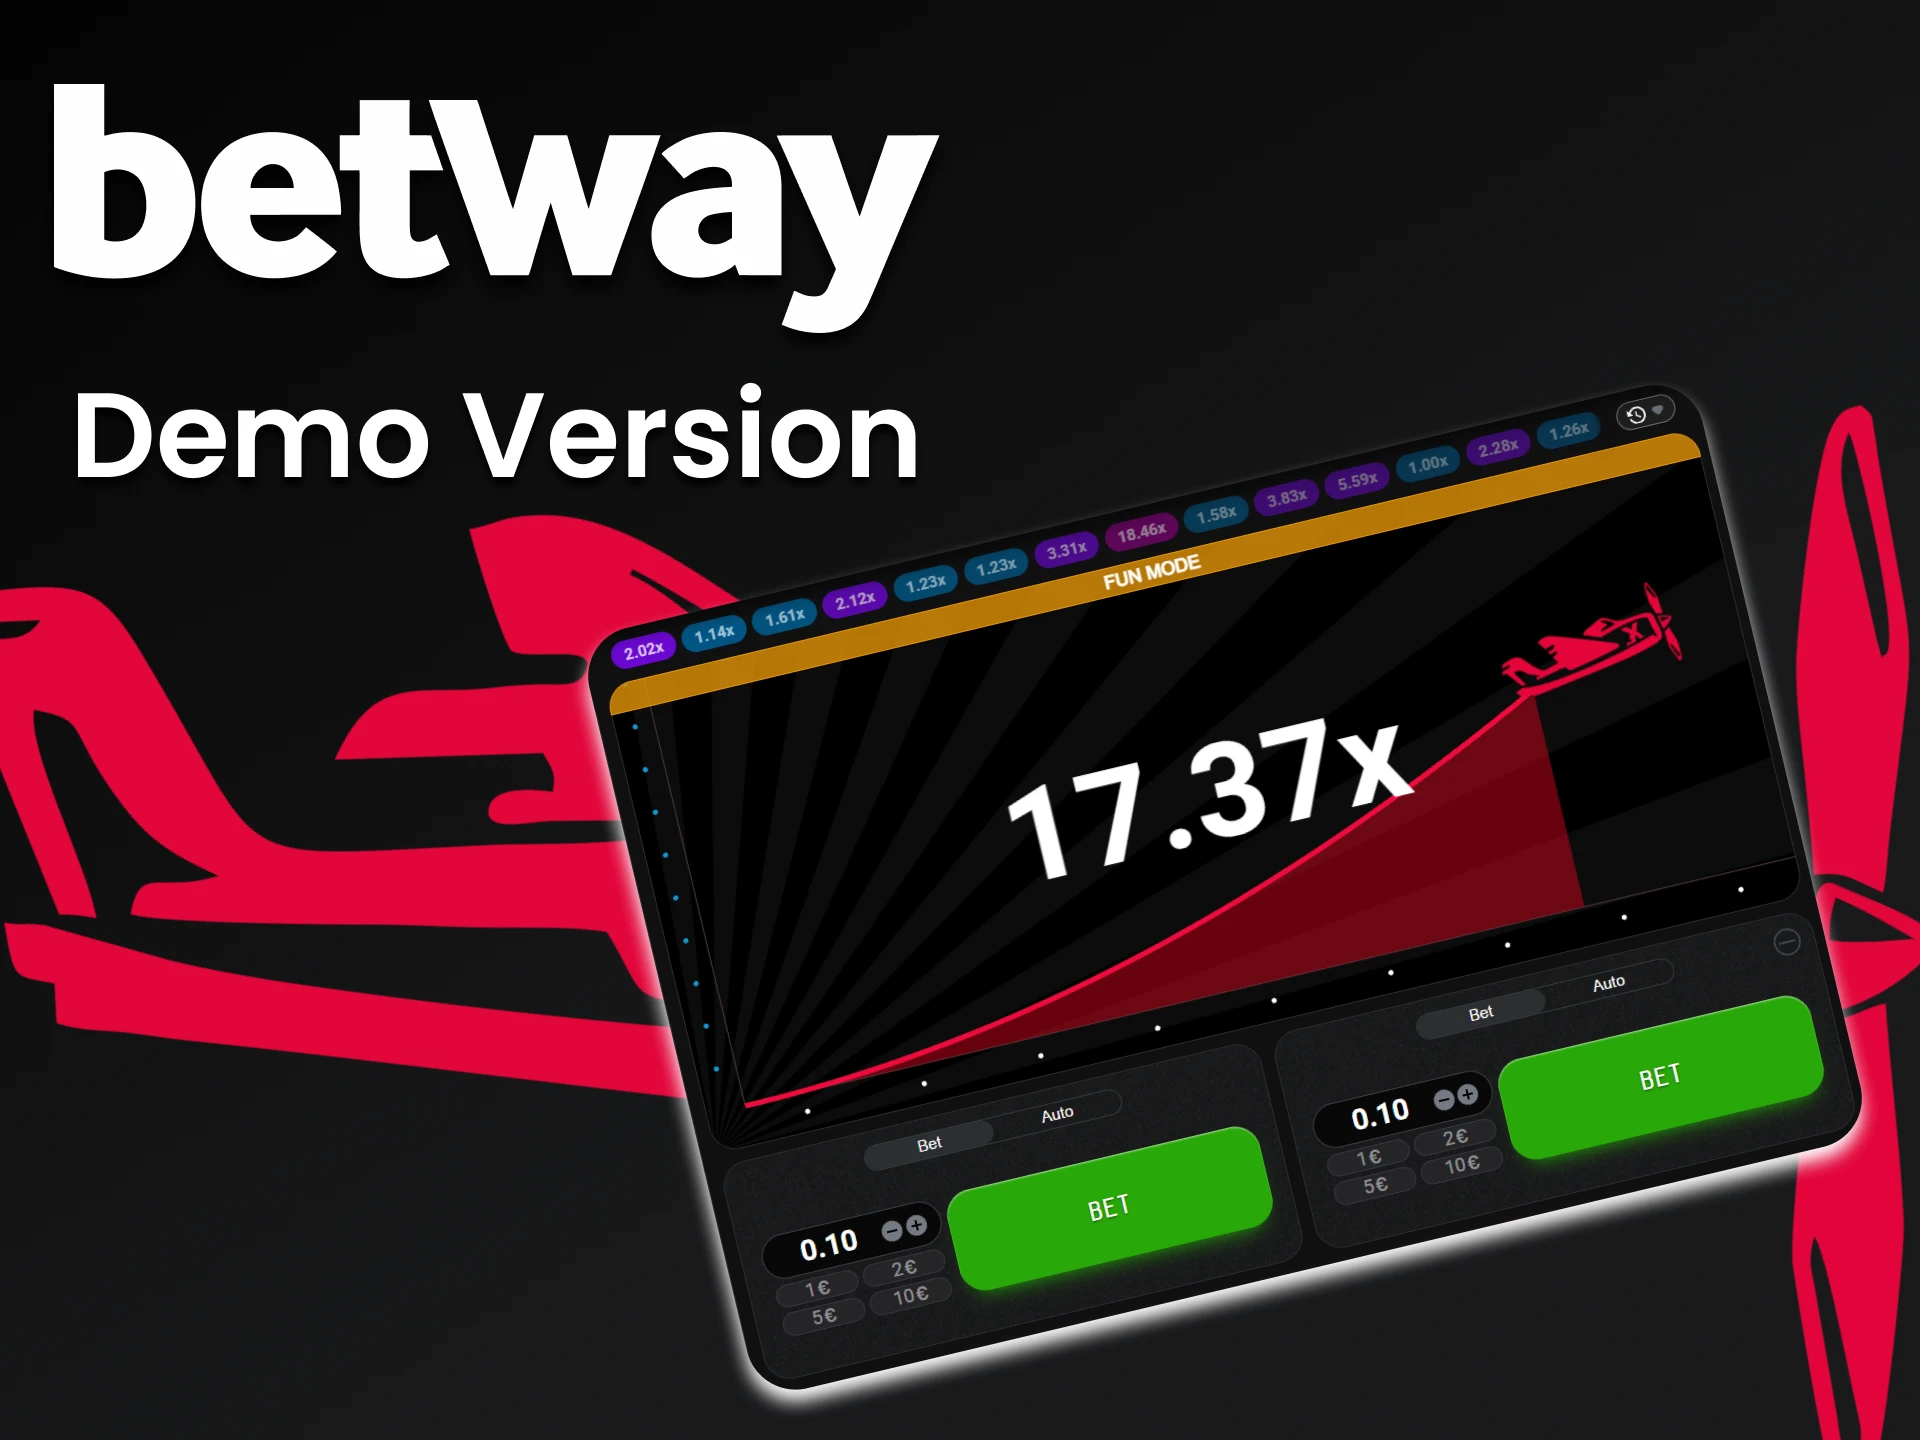 On Betway you can train in the game aviator in a special version.